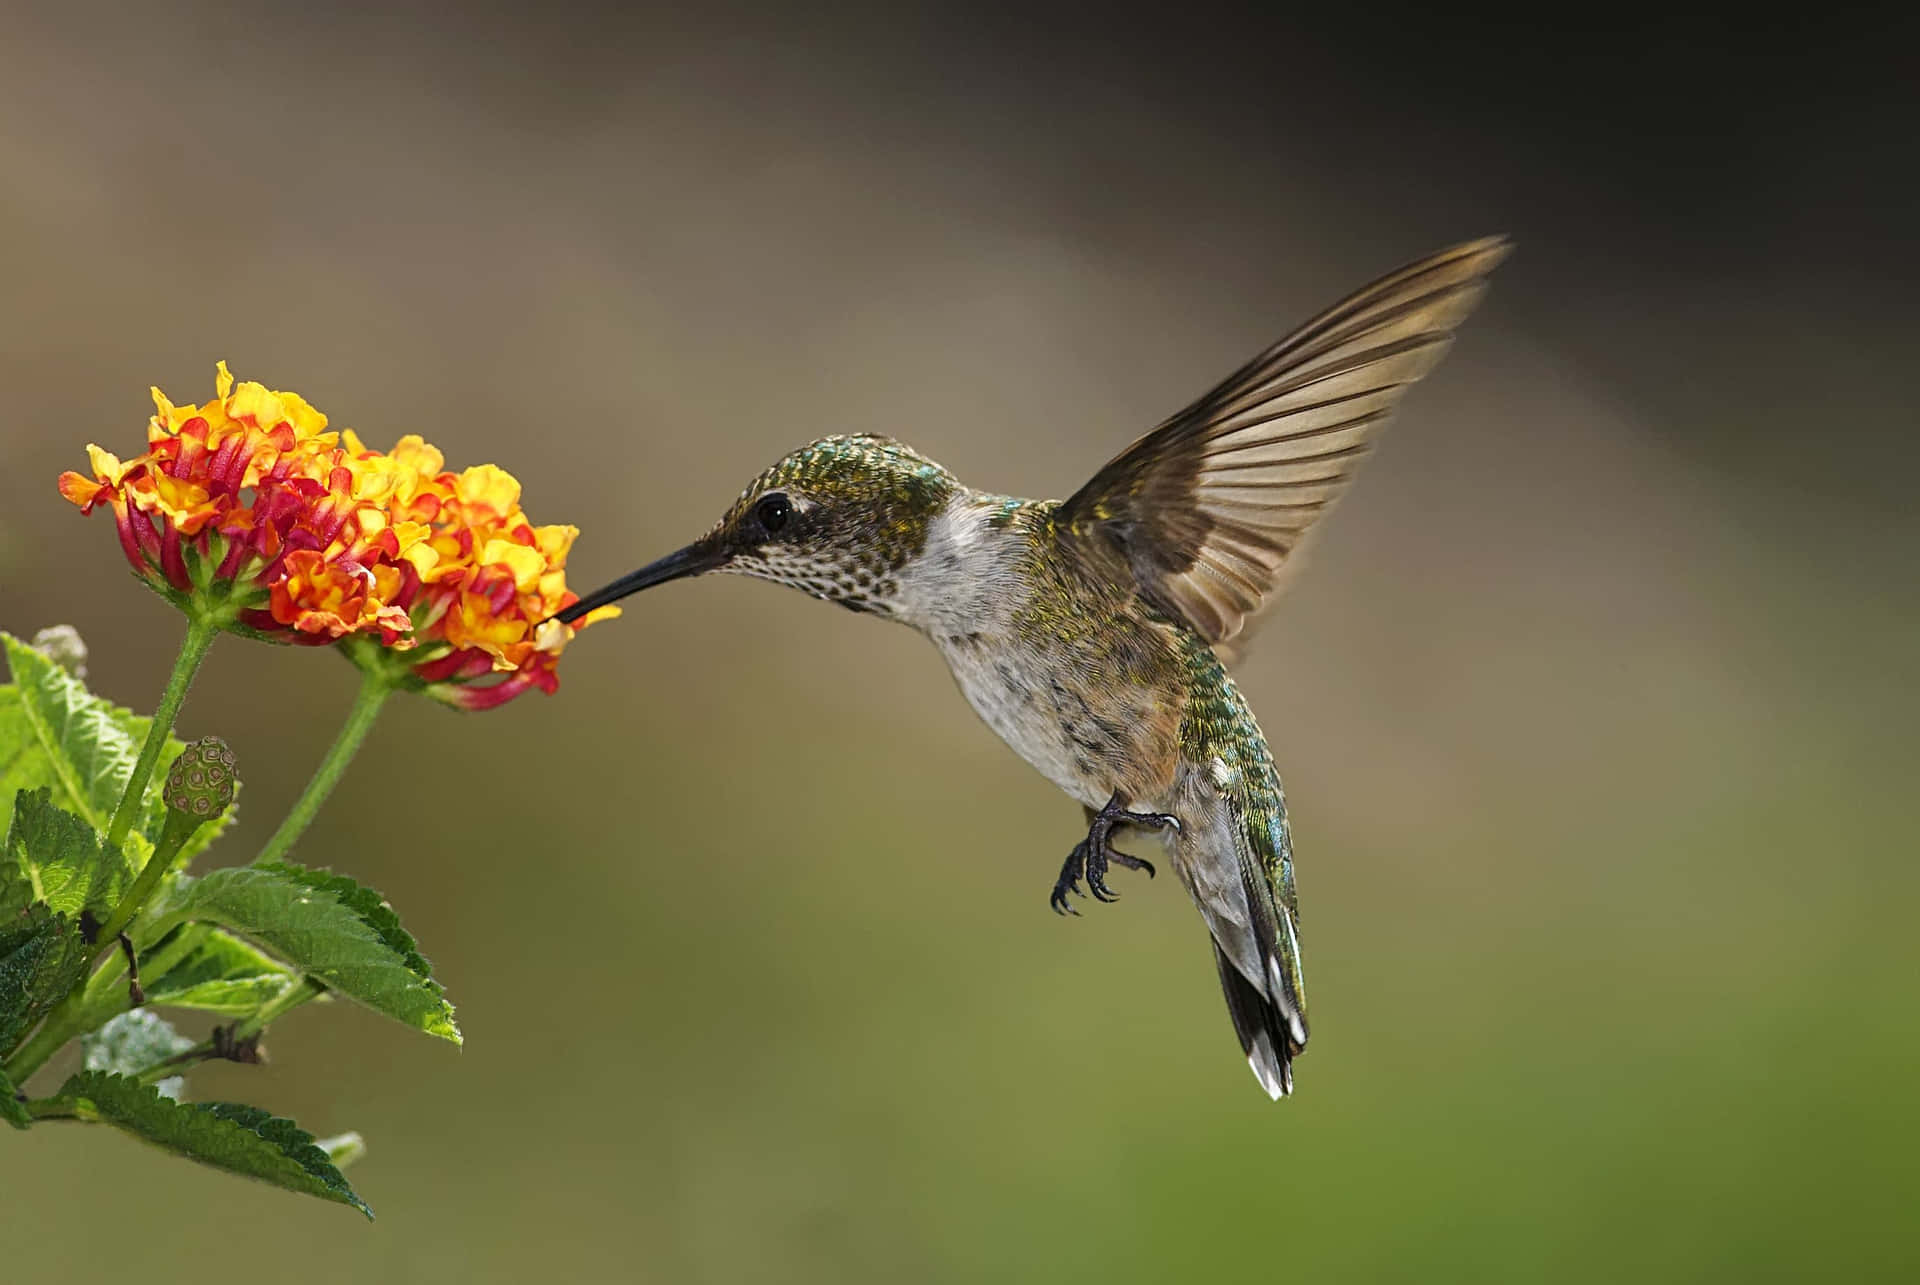 A female hummingbird hovering in front of the lens